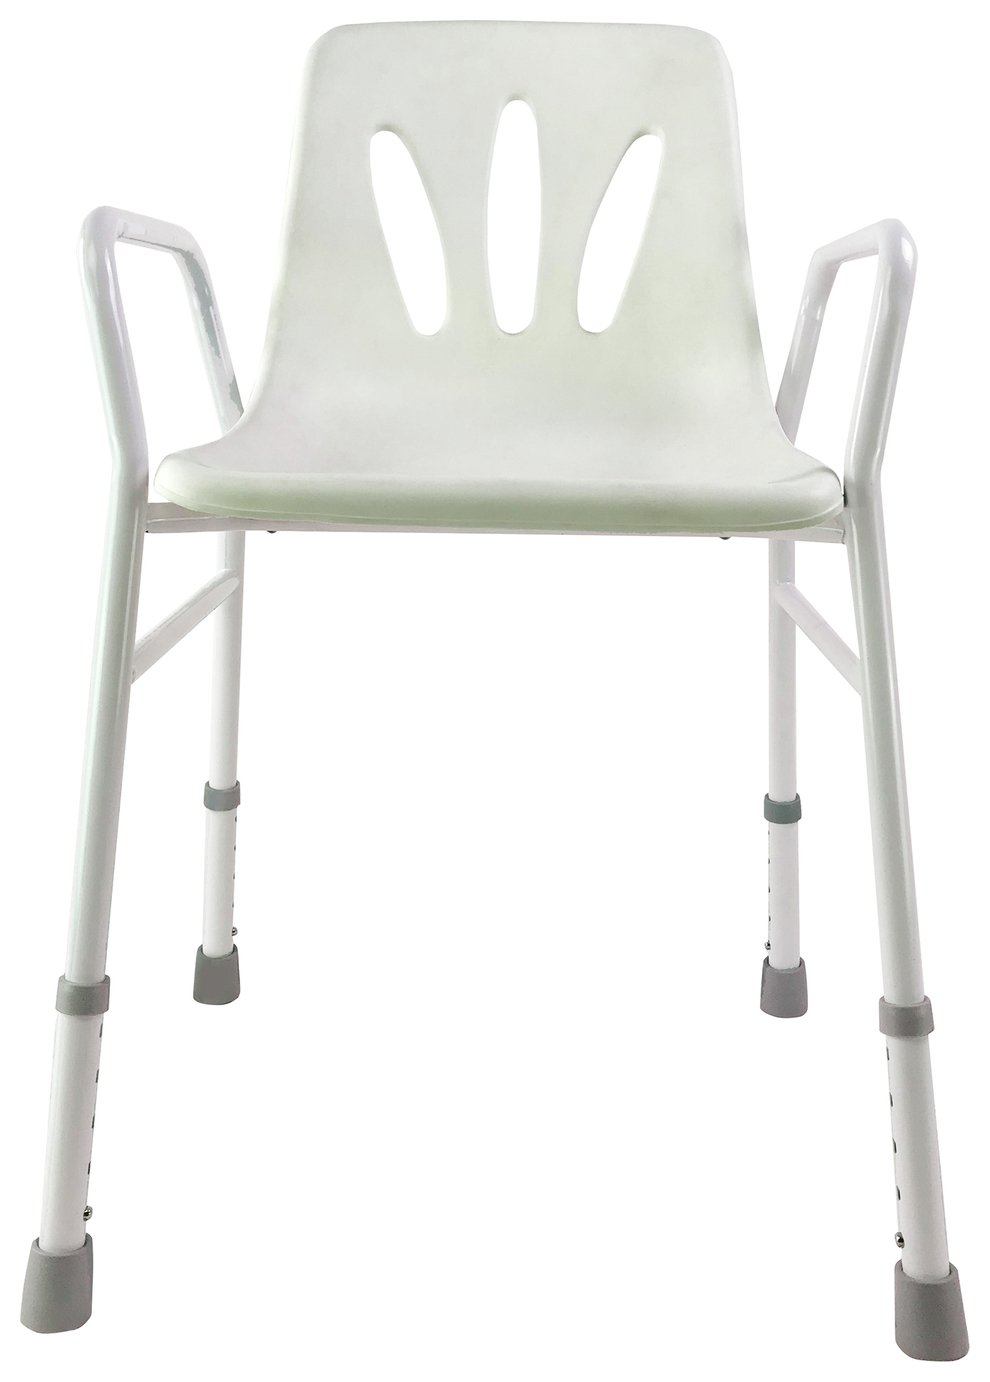 Aidapt Adjustable Height Shower Chair Review